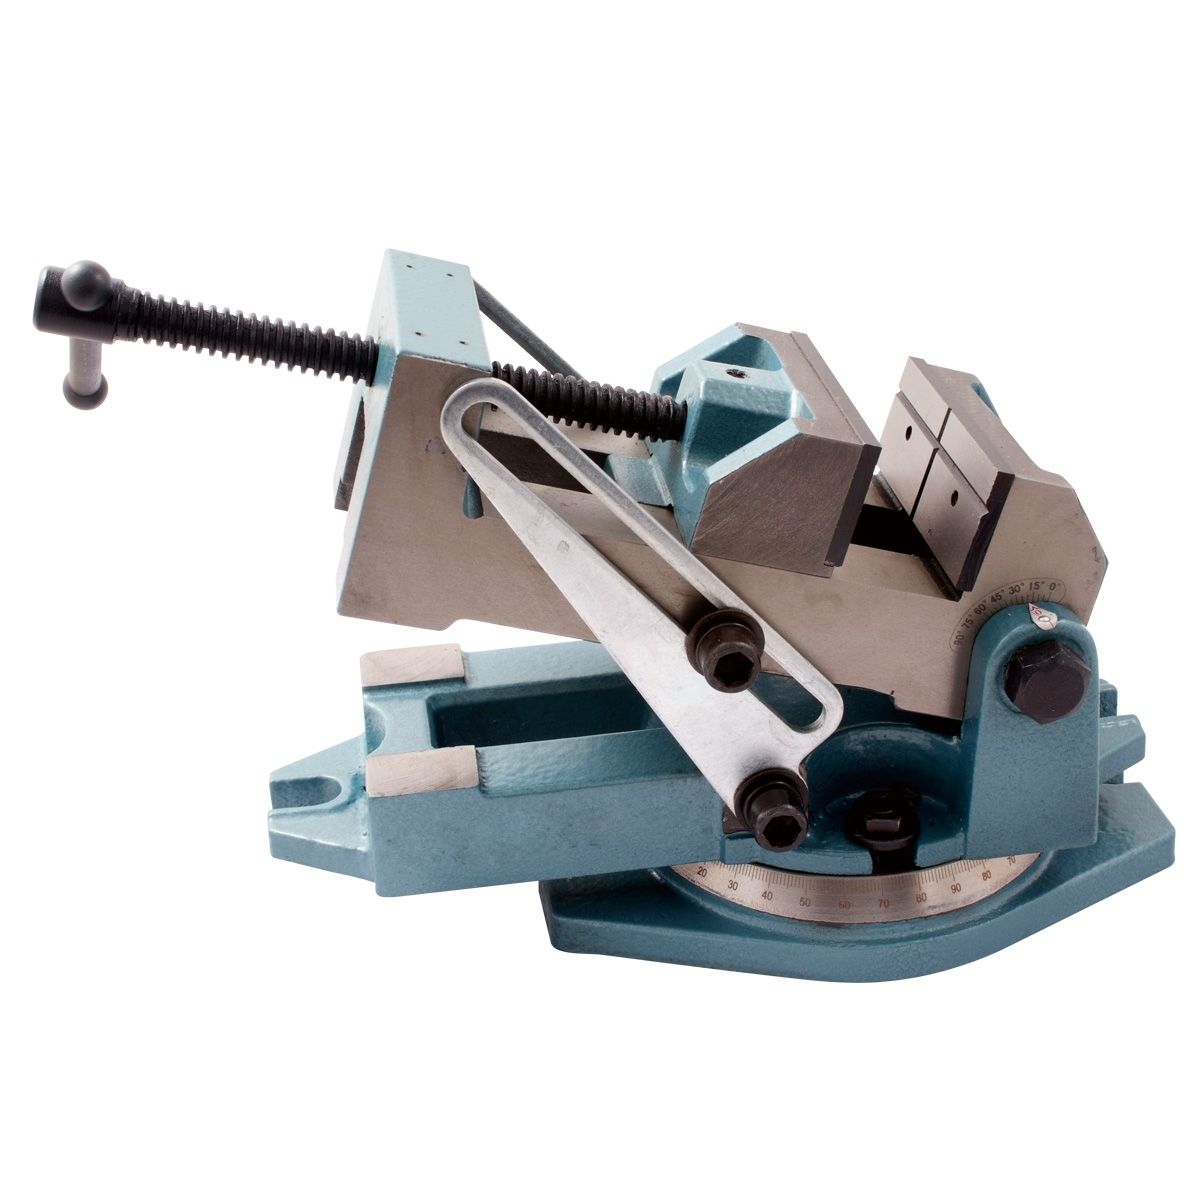 6" PRO-SERIES ANGLE DRILL PRESS VISE WITH SWIVEL BASE (3901-1737)